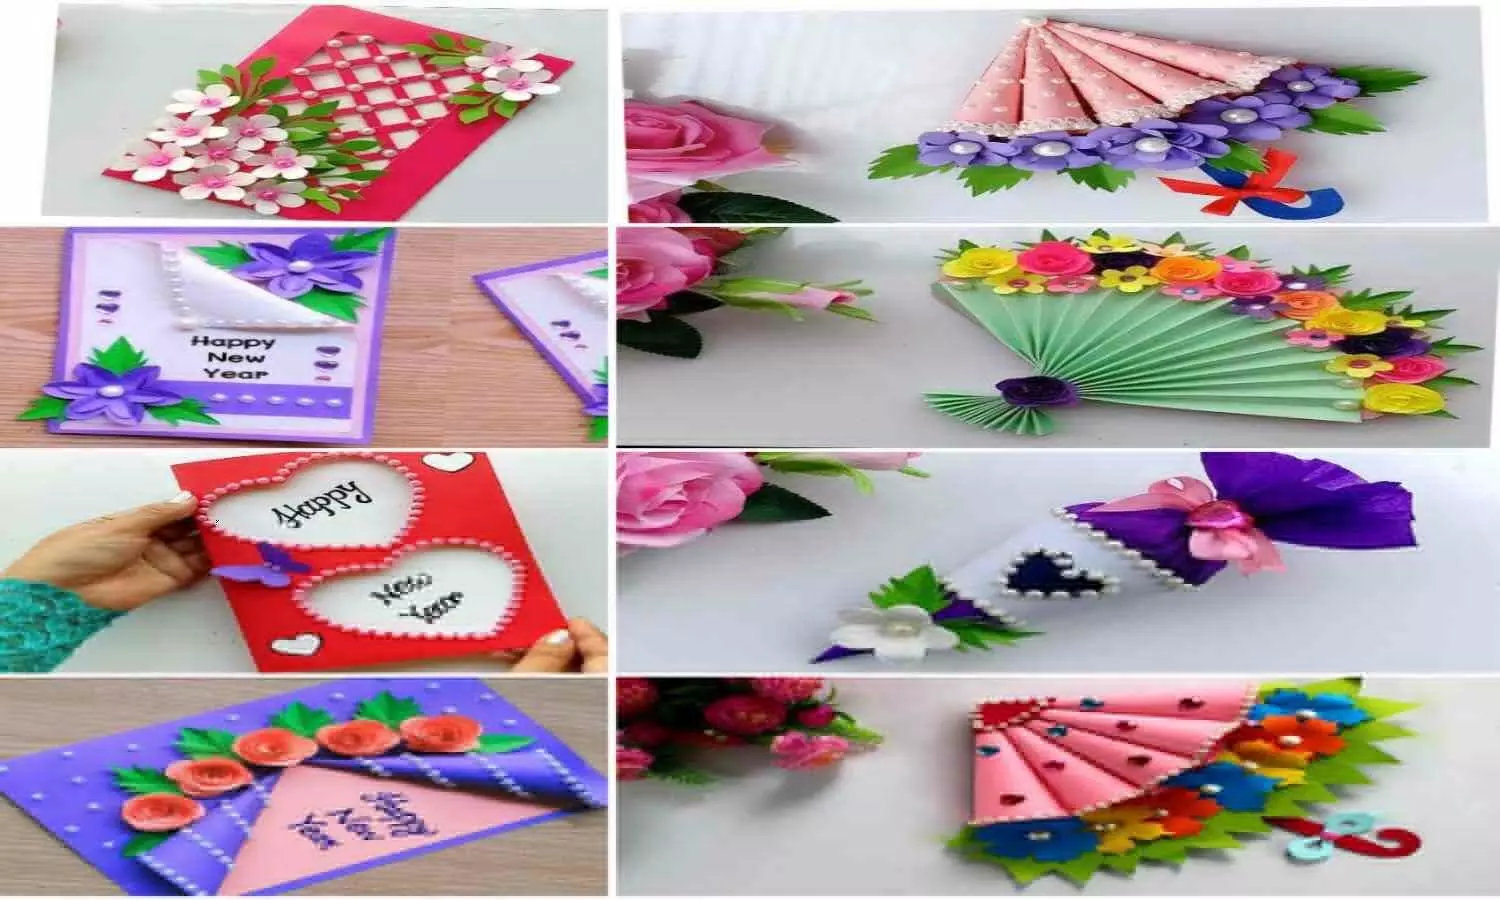 How to make DIY greetings card at home for happy new year 2023